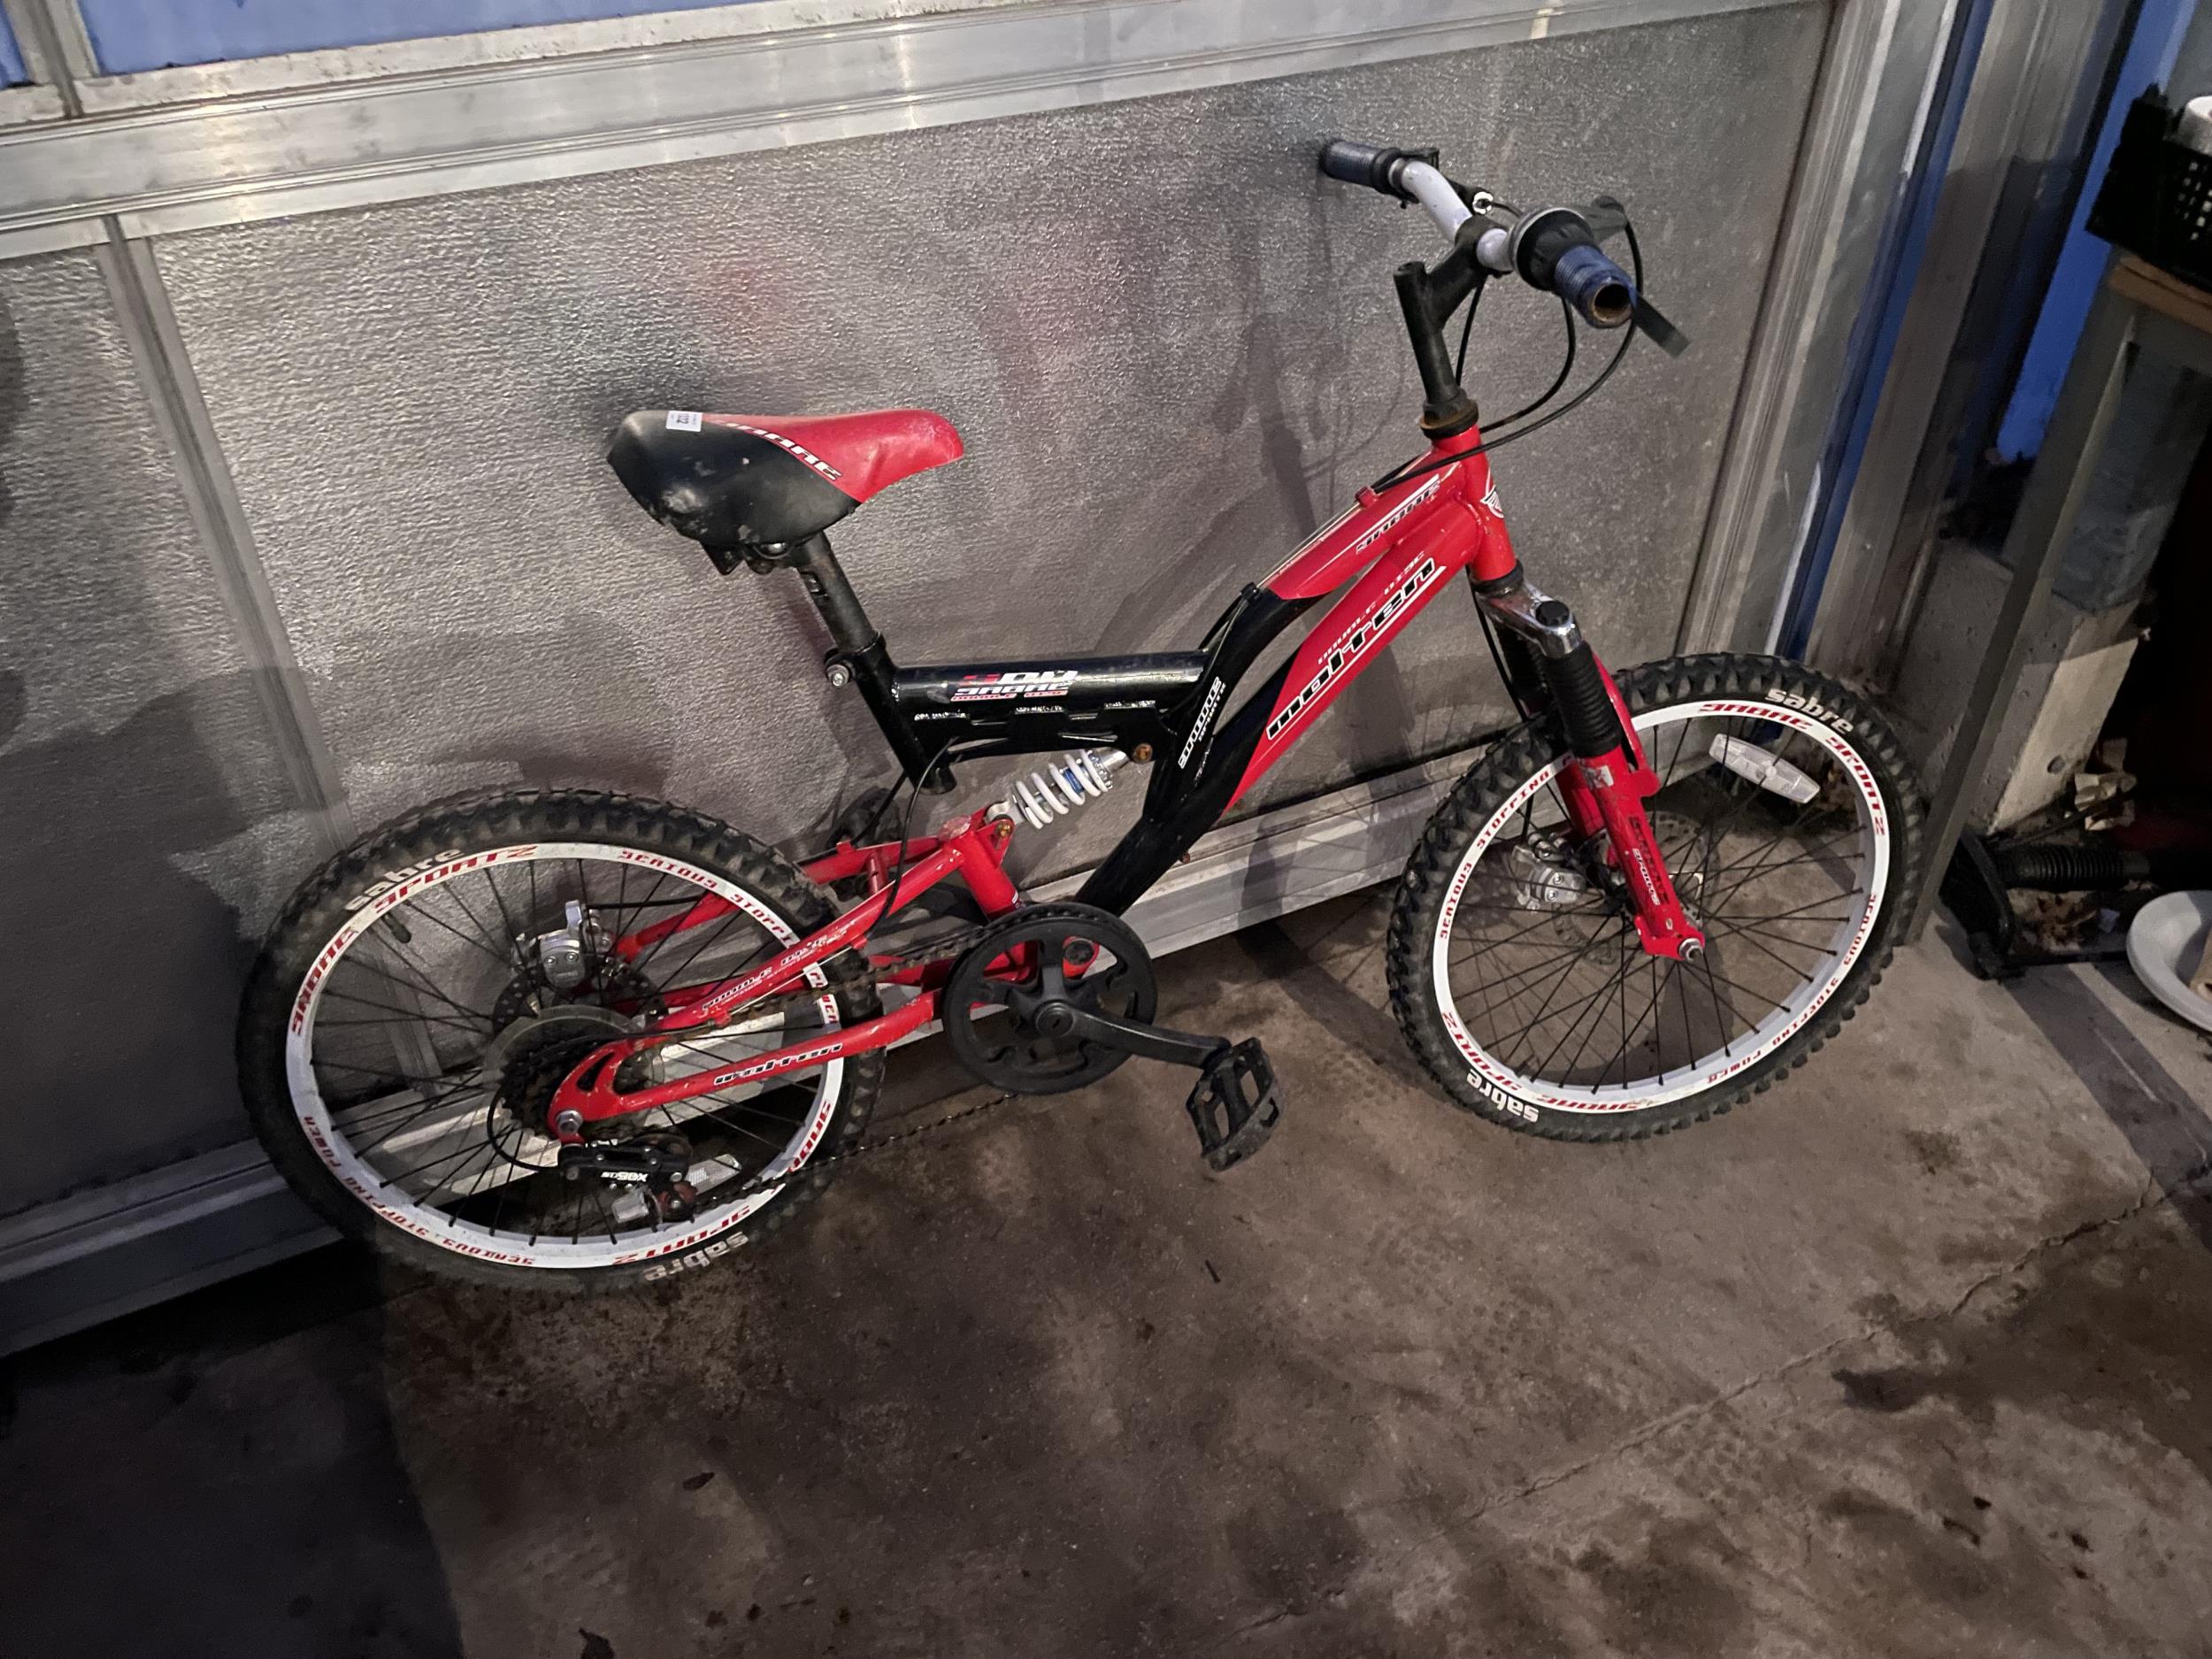 A CHILDRENS SABRE MOUNTAIN BIKE WITH FRONT AND BACK SUSPENSION AND 6 SPEED GEAR SYSTEM